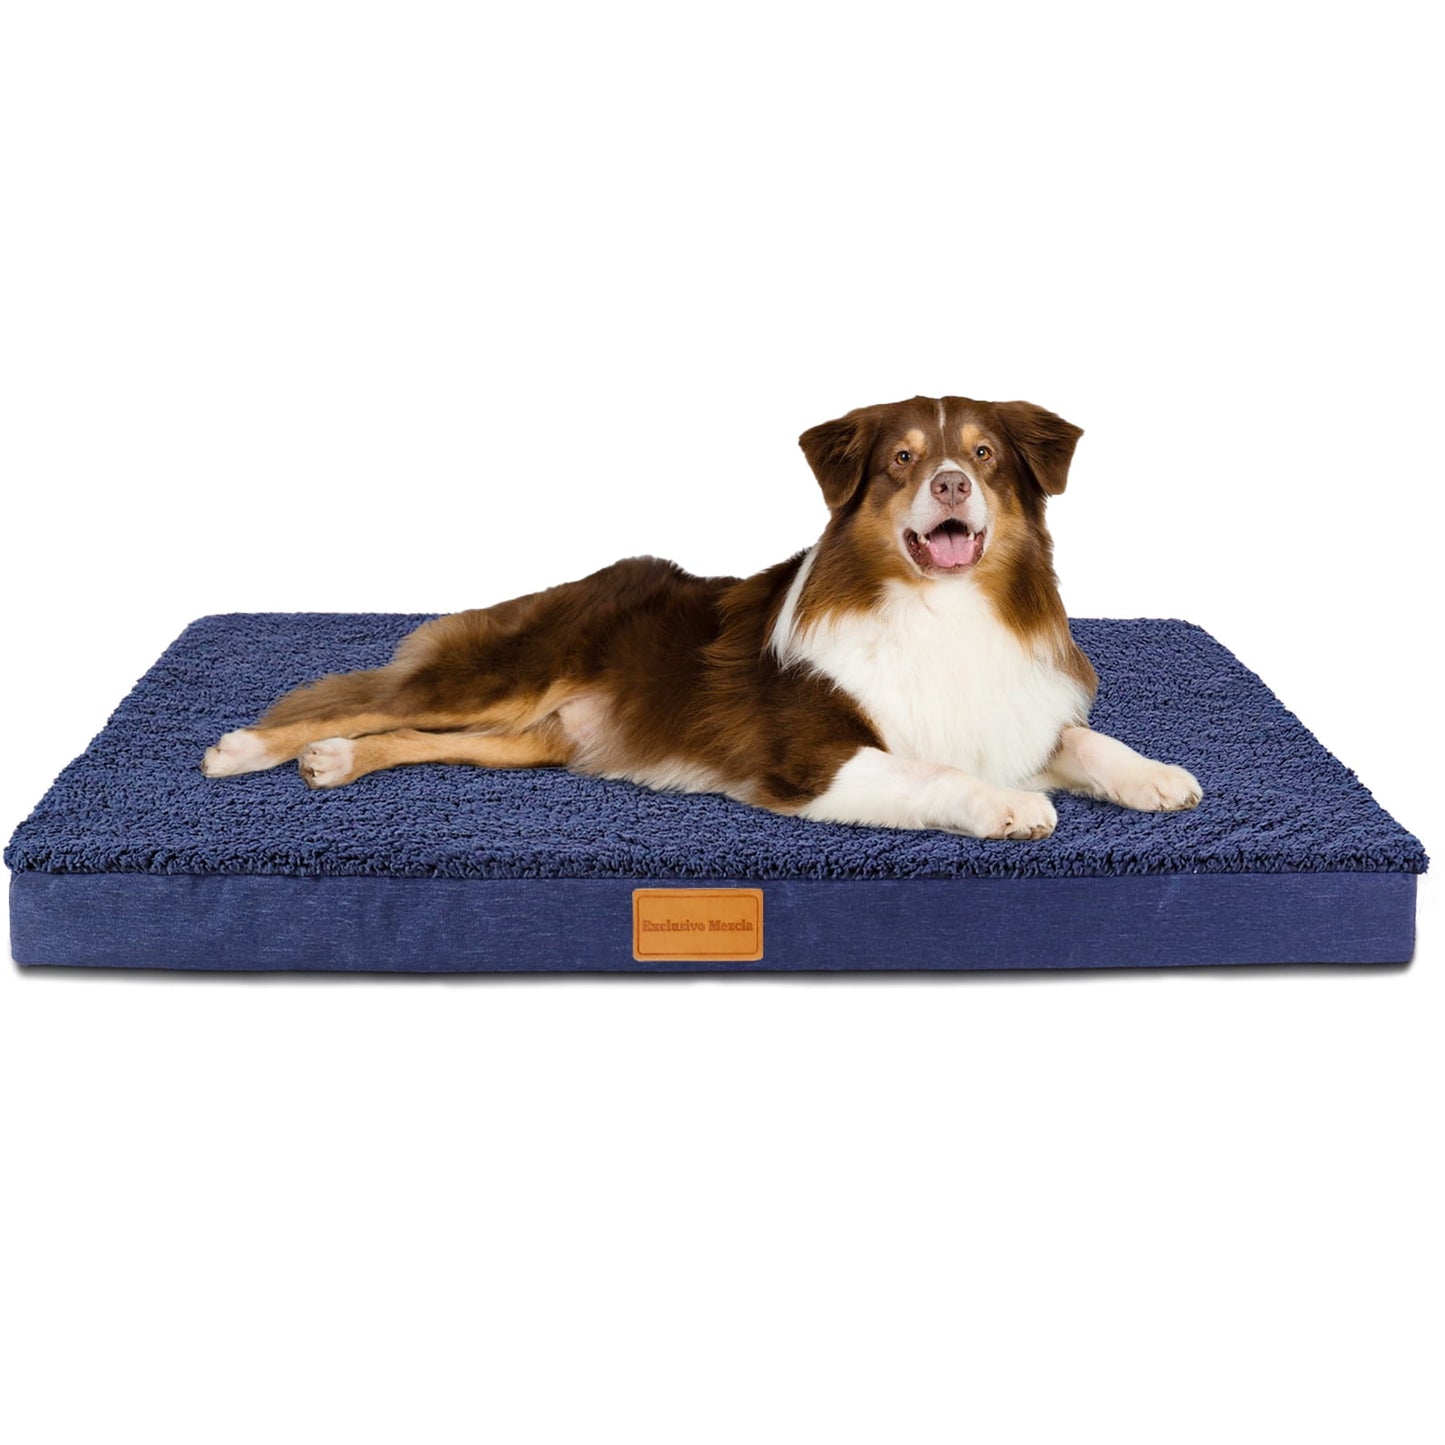 Exclusivo Mezcla Orthopedic Dog Bed for Medium Dogs 36''X24'', Egg Crate Foam Medium Dog Beds with Removable Washable Cover,Waterproof Pet Bed Mat, Navy Blue